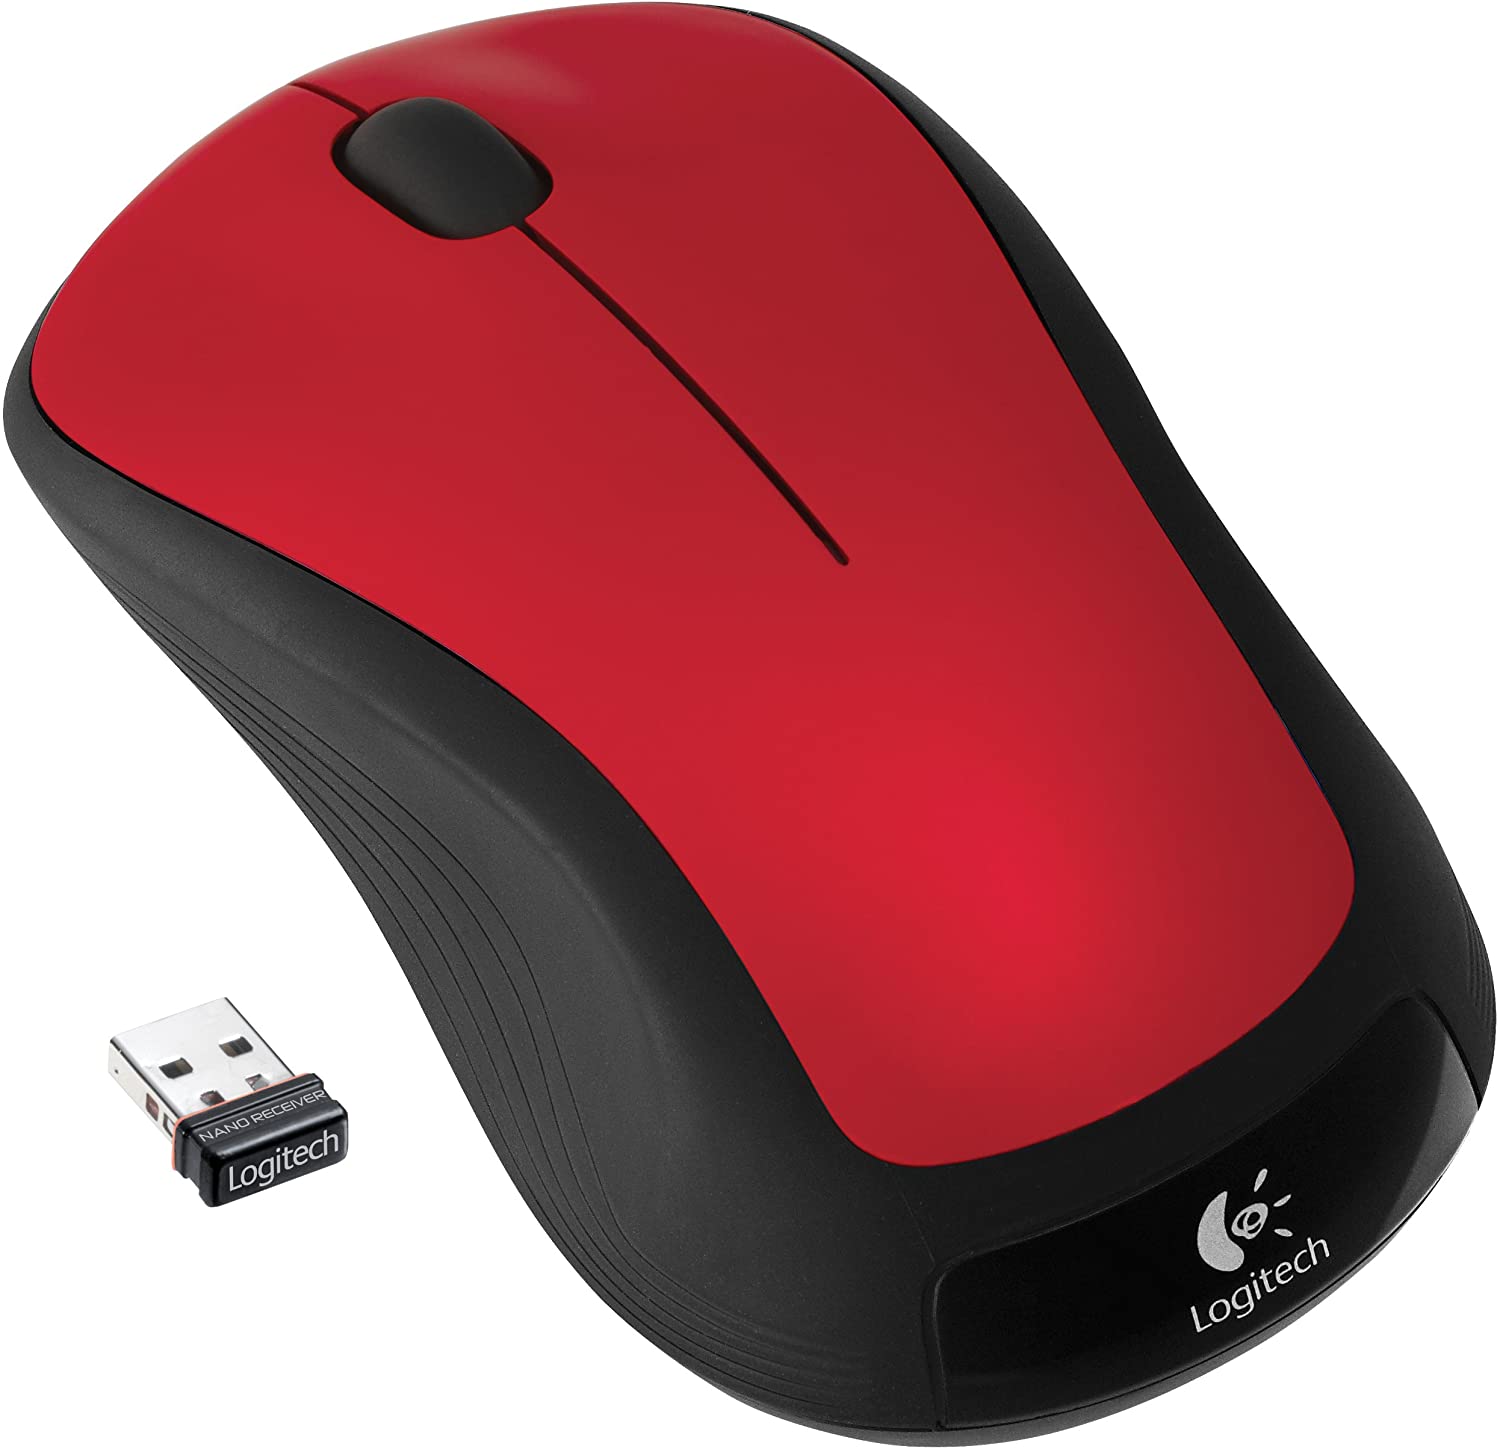 Logitech M310 Mouse - Laser - Wireless - Radio Frequency - Flame Red - Usb - 1000 Dpi - Computer